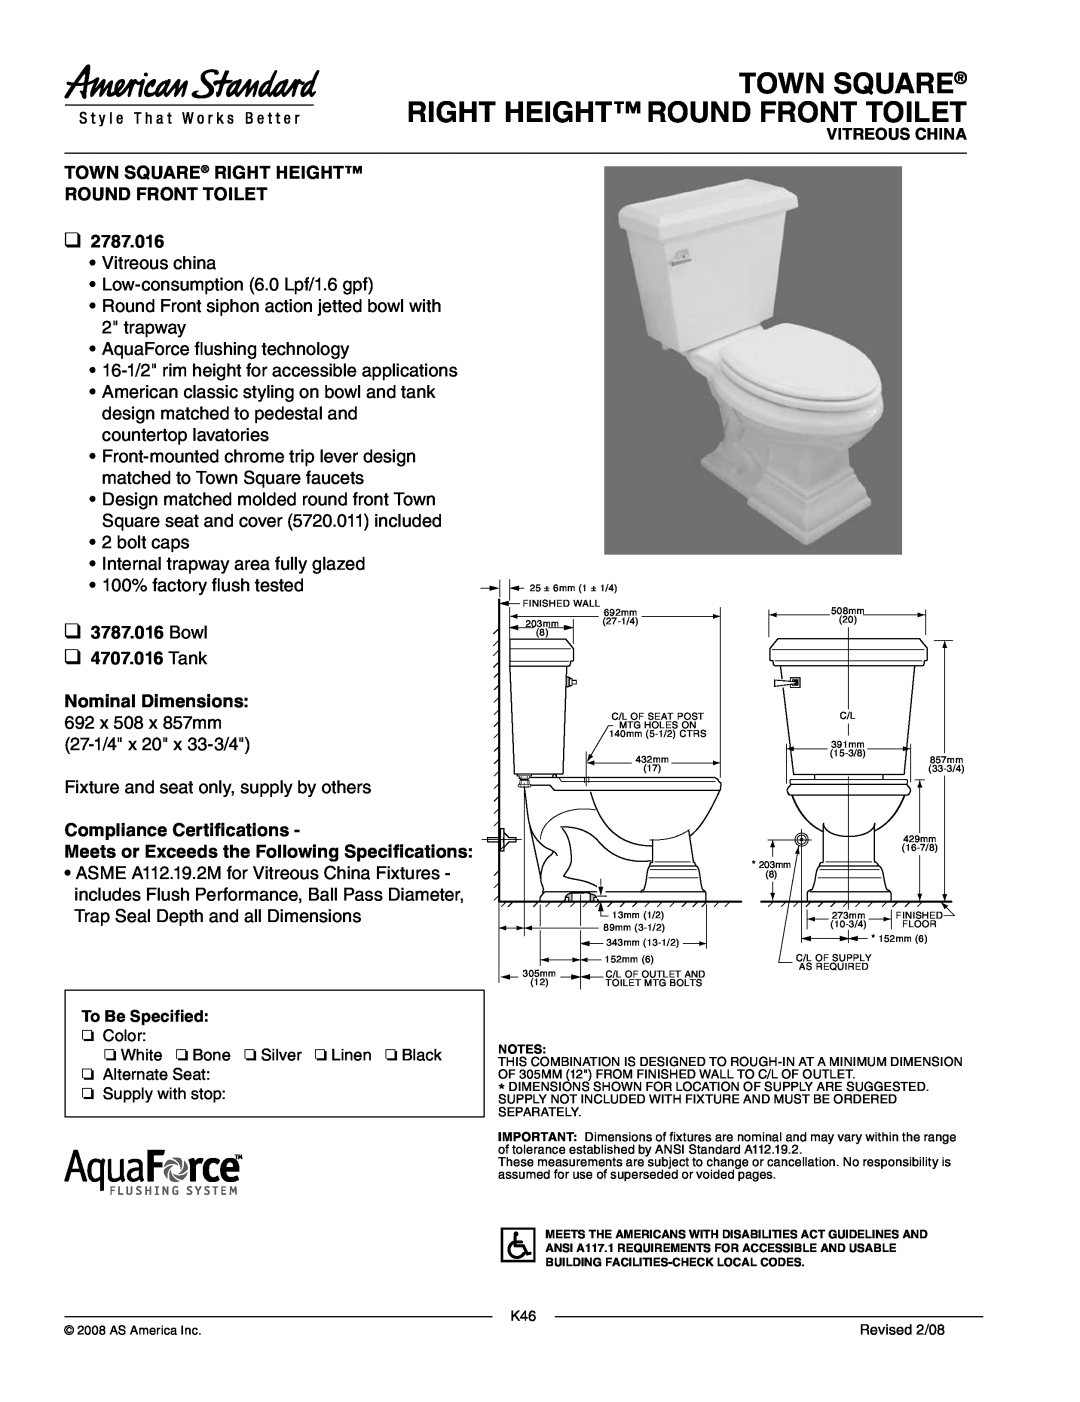 American Standard 3787.016 dimensions Town Square Right Height Round Front Toilet, 2787.016, Compliance Certifications 